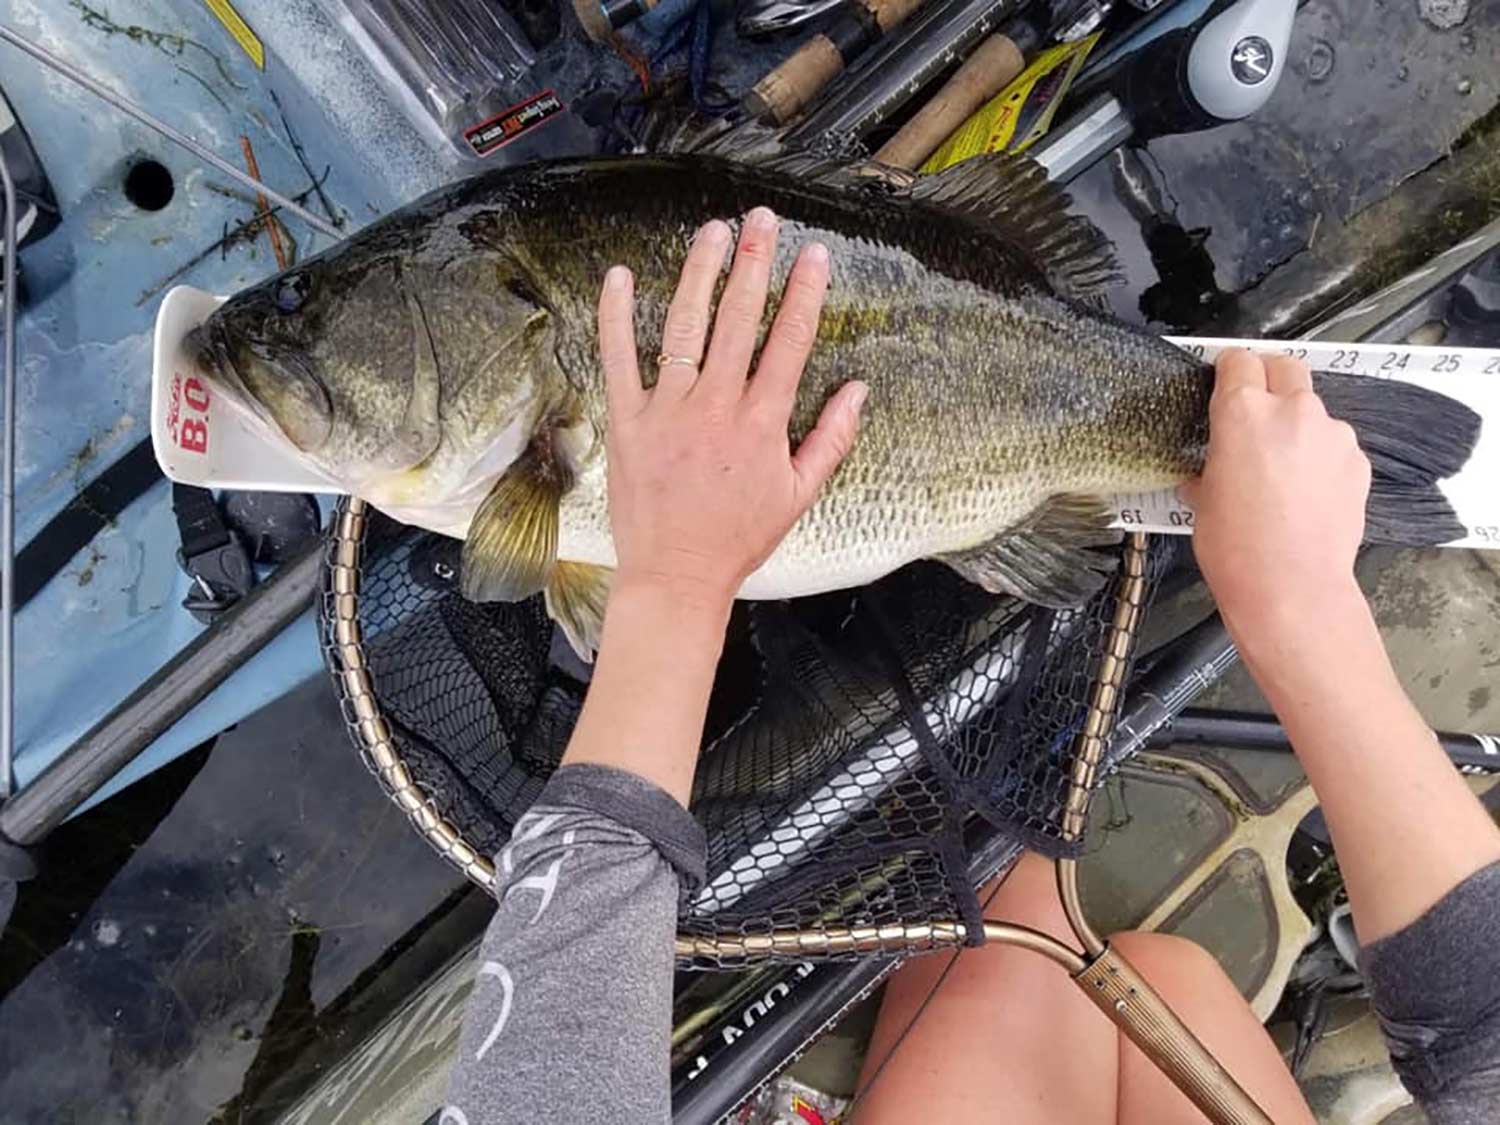 Angler measures the length of a largemouth bass.